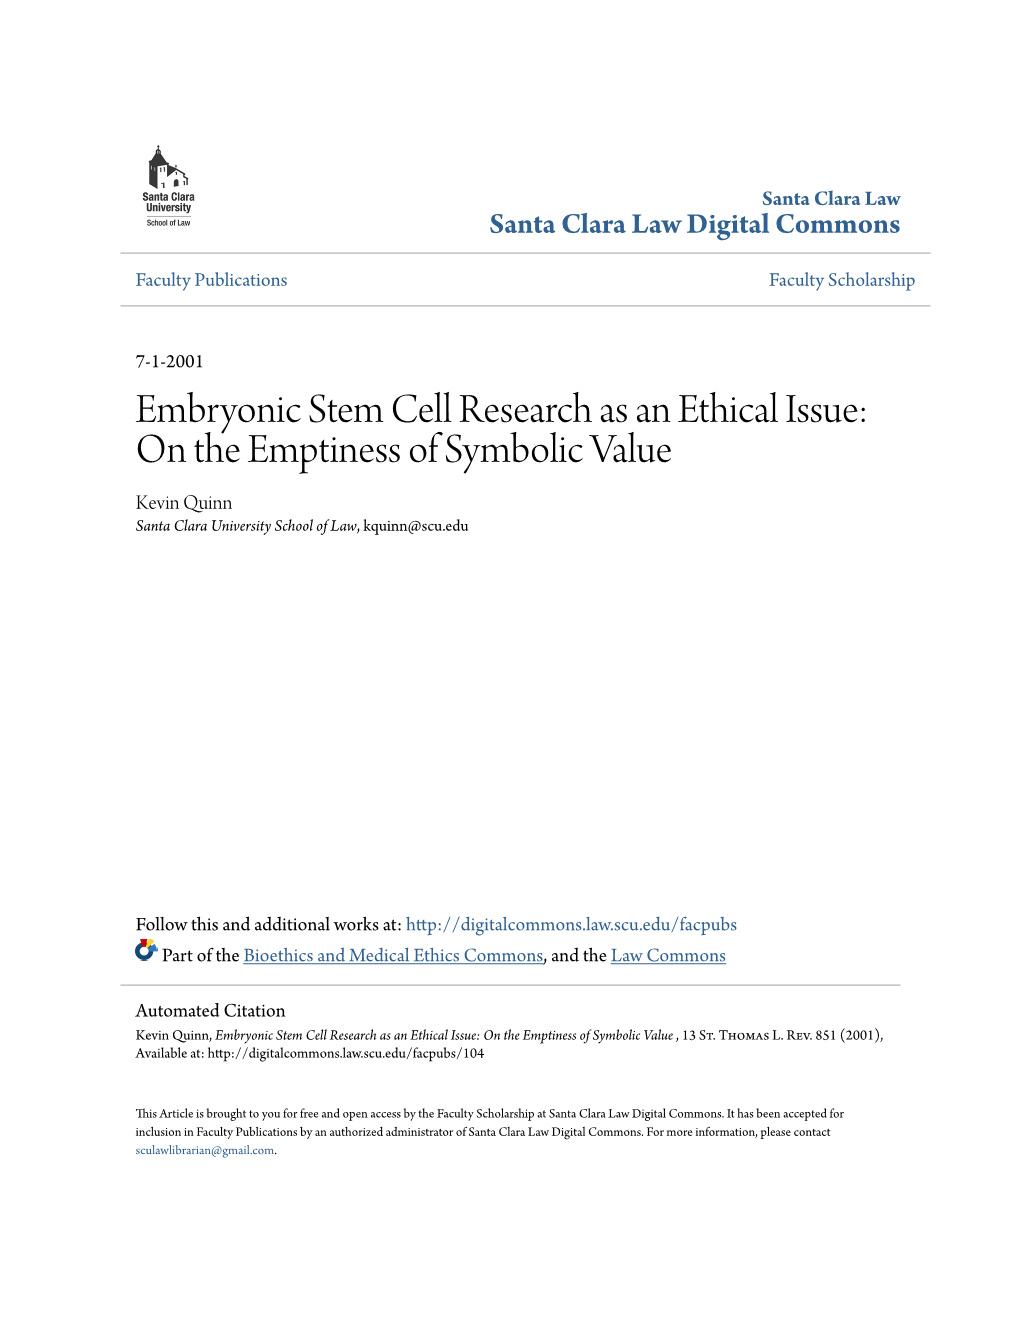 Embryonic Stem Cell Research As an Ethical Issue: on the Emptiness of Symbolic Value Kevin Quinn Santa Clara University School of Law, Kquinn@Scu.Edu